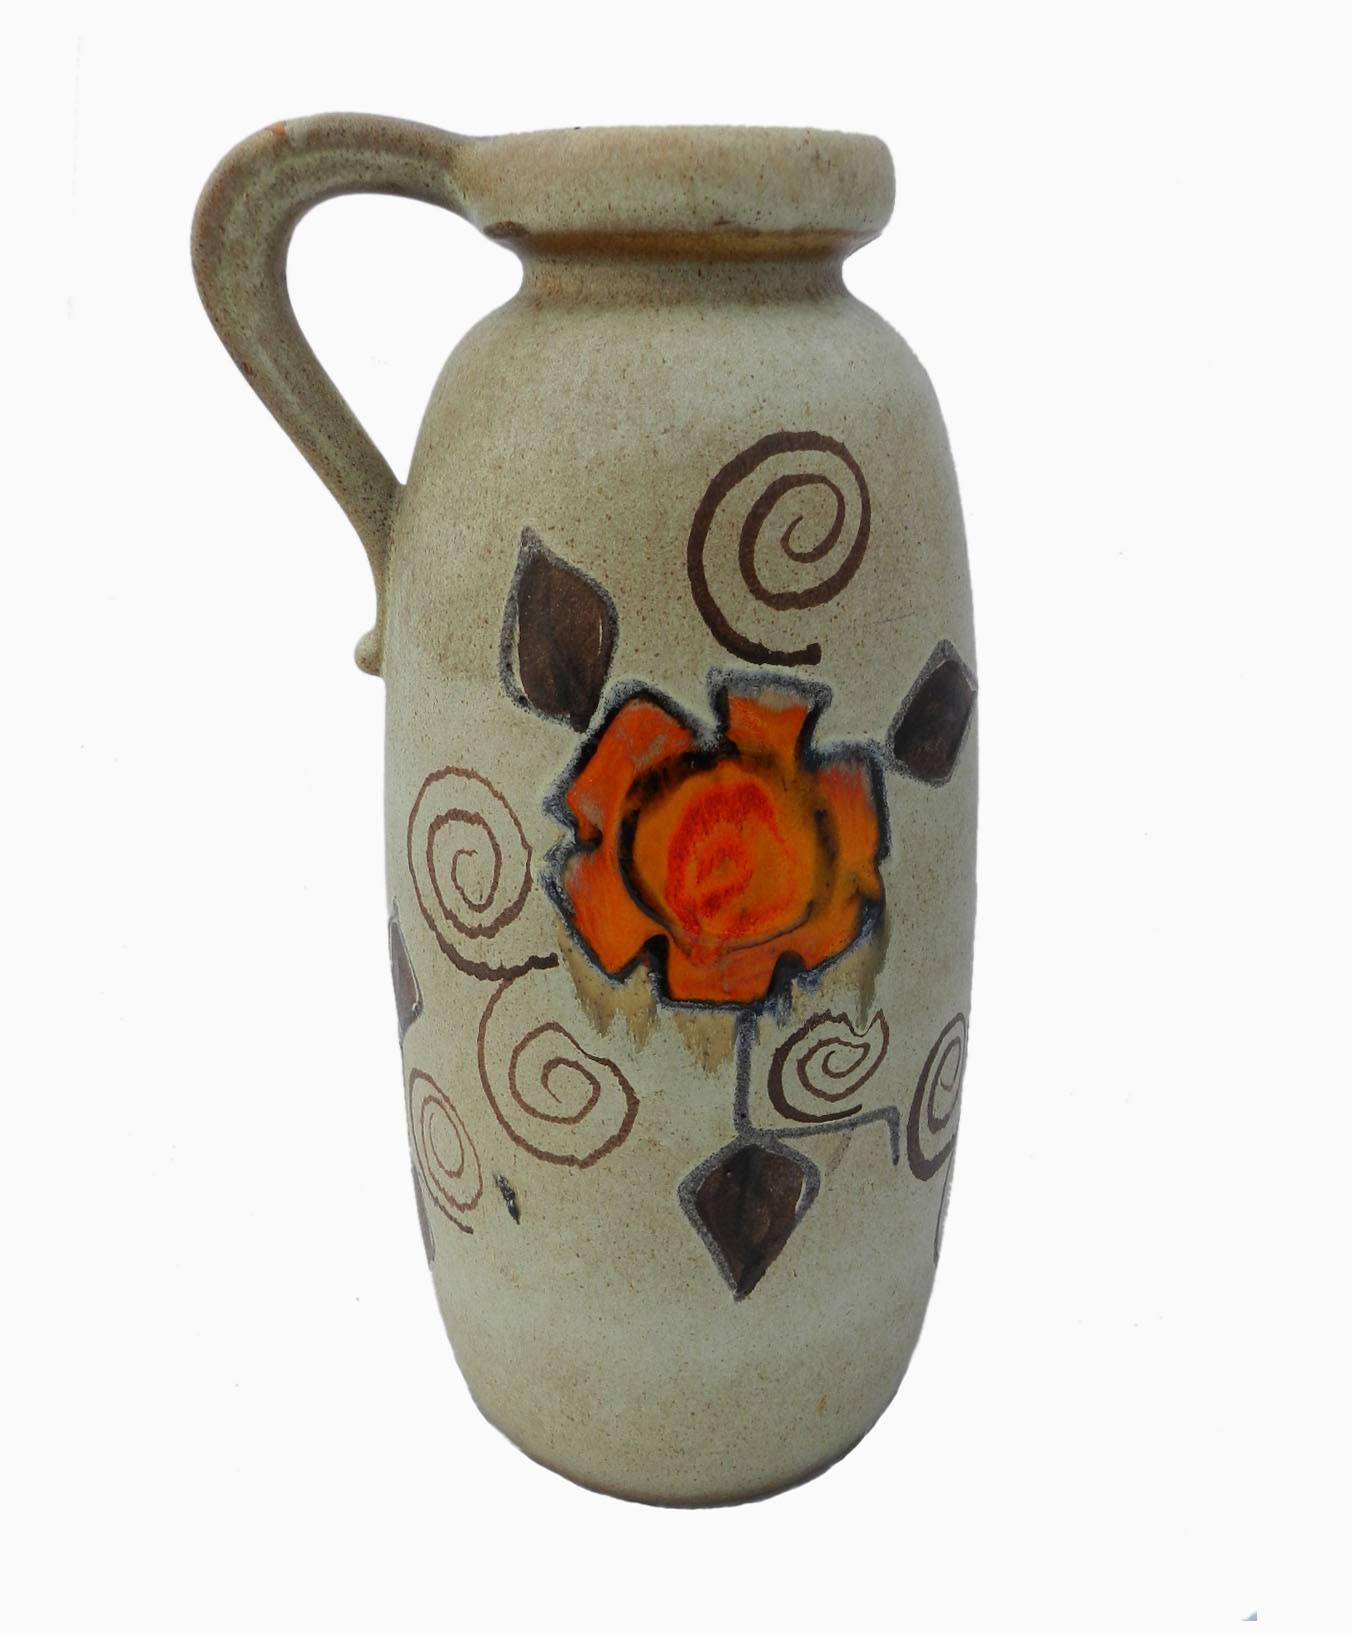 Large German floor vase circa 1960-1970.
Gloriously decorative piece in excellent condition.
By Bay and Scheurich Keramik, Westerwald Germany
Art Pottery ceramic stick or umbrella stand.
Solid and sturdy, good and heavy!
Excellent original condition